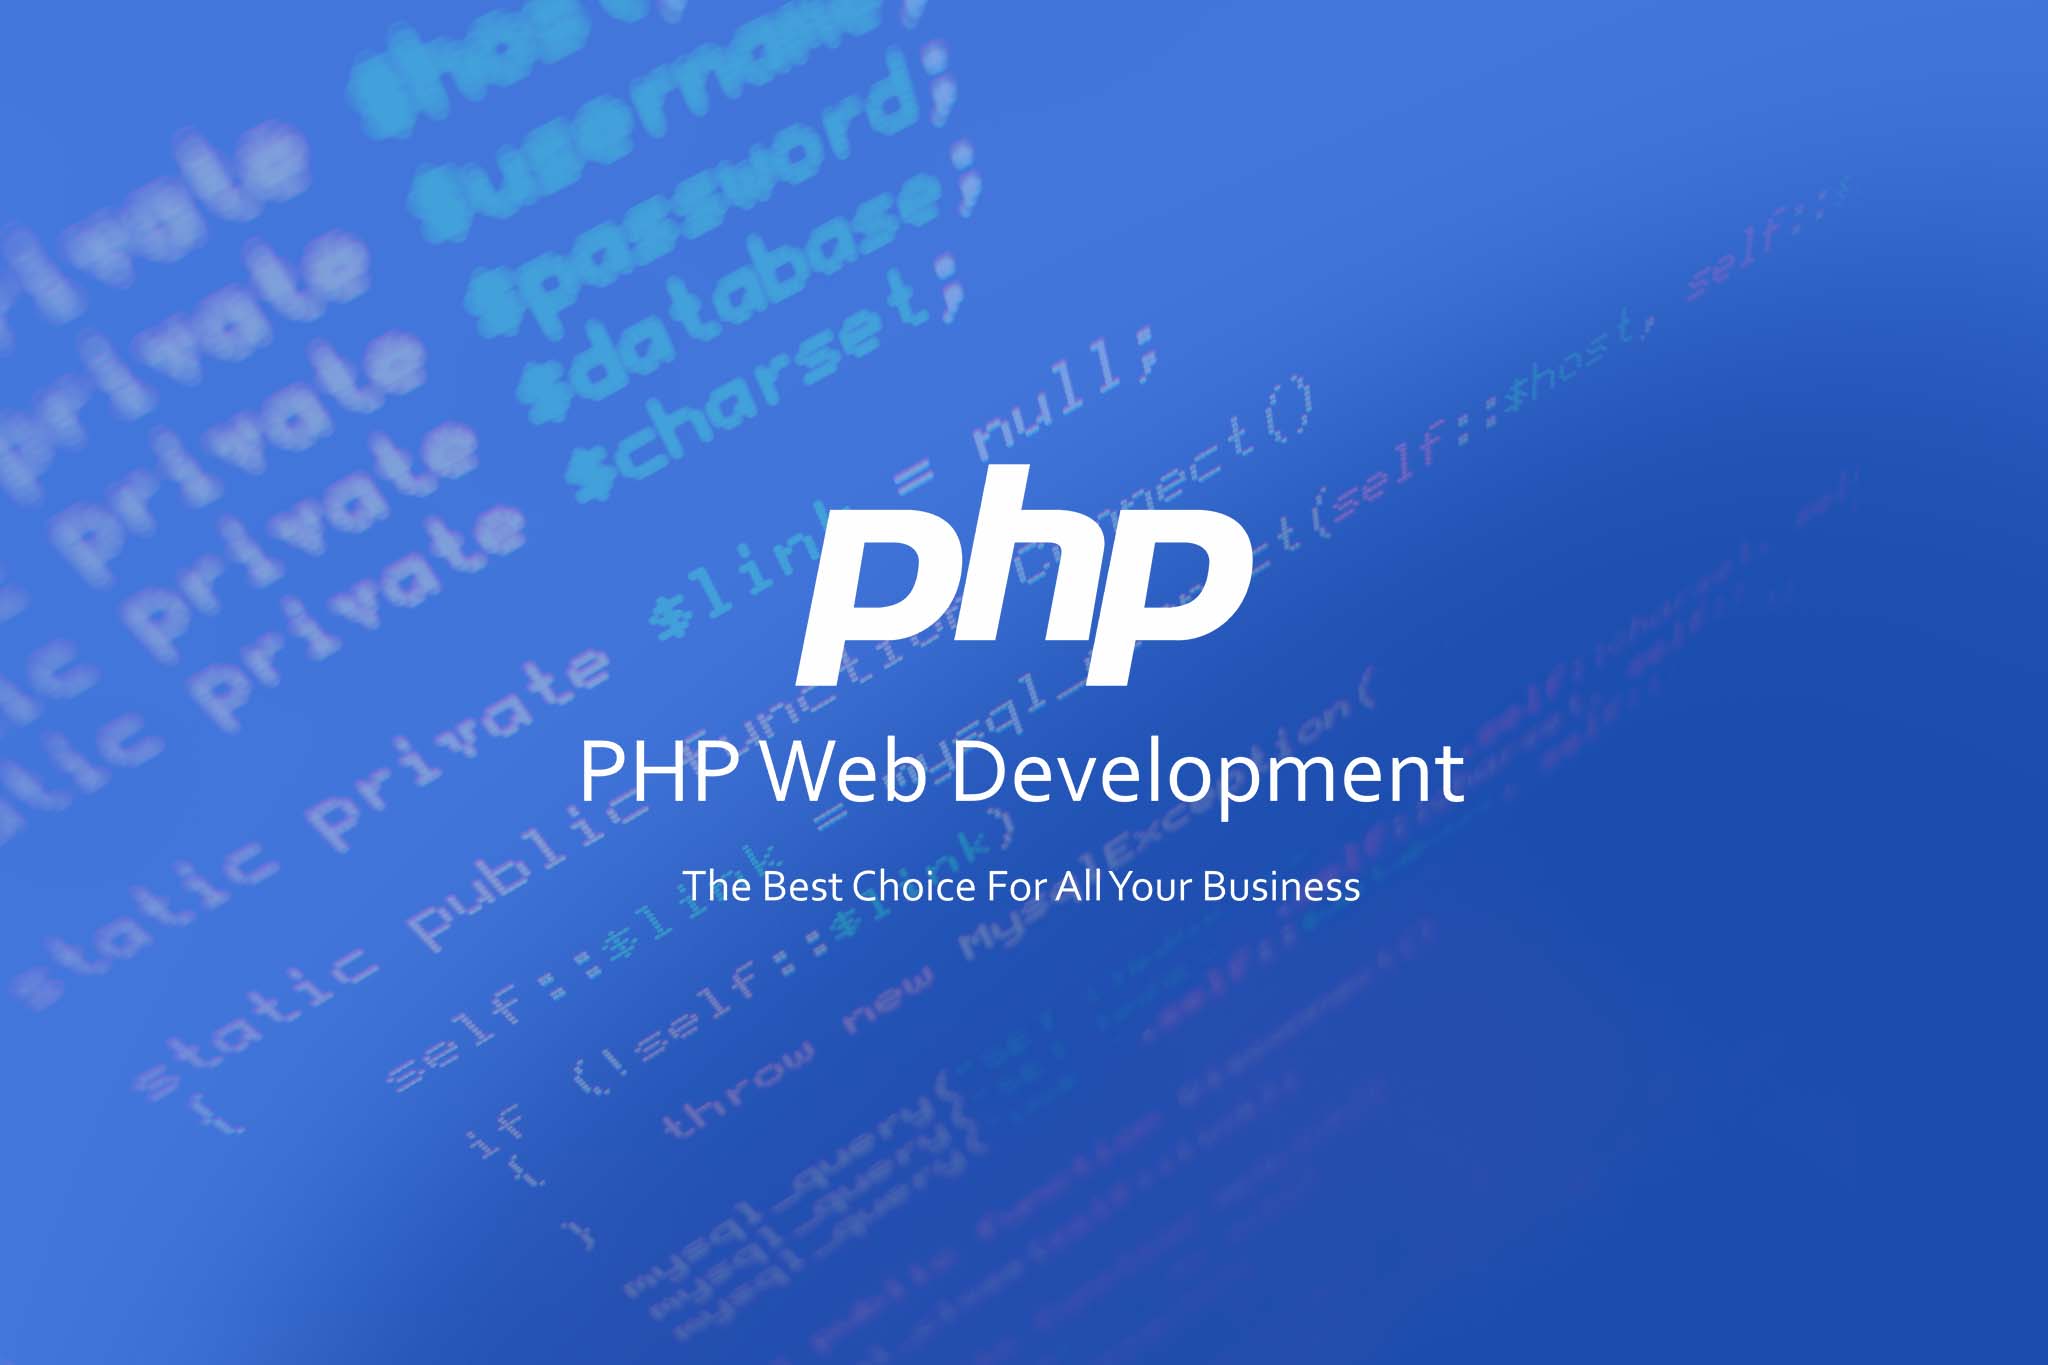 Best option for website create in php web development company